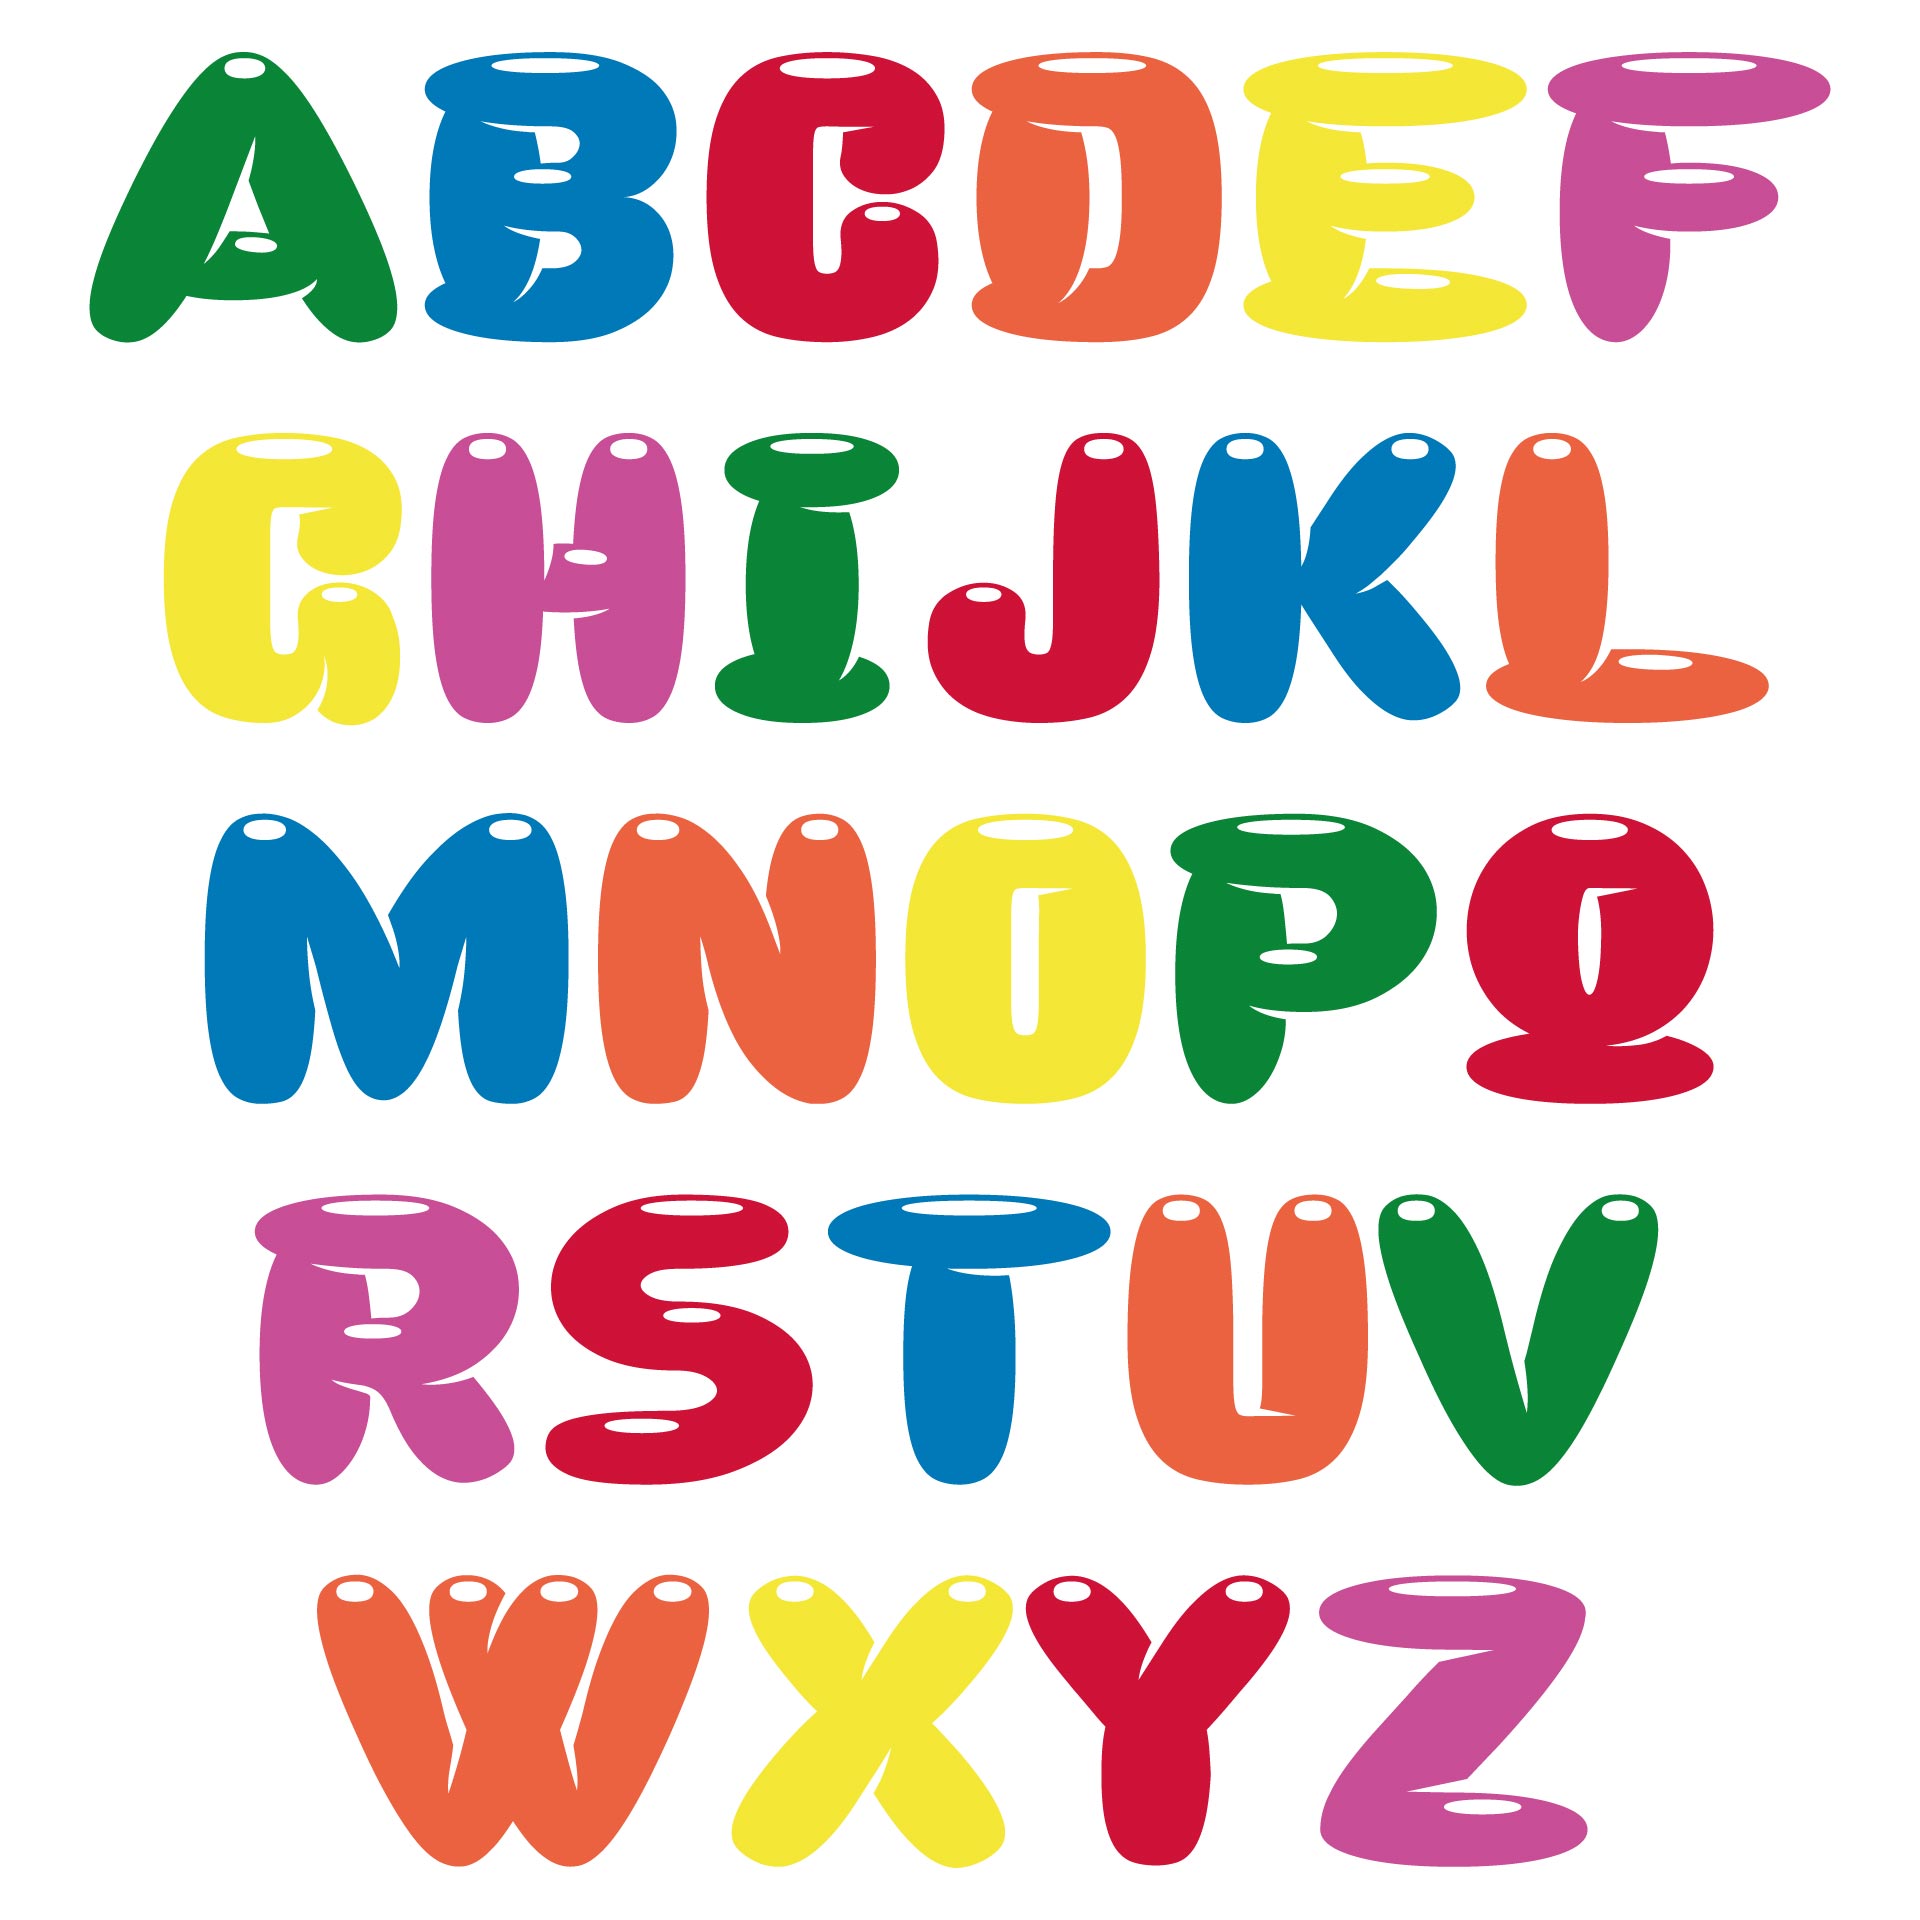 10-best-colored-printable-bubble-letter-font-printablee-3ca